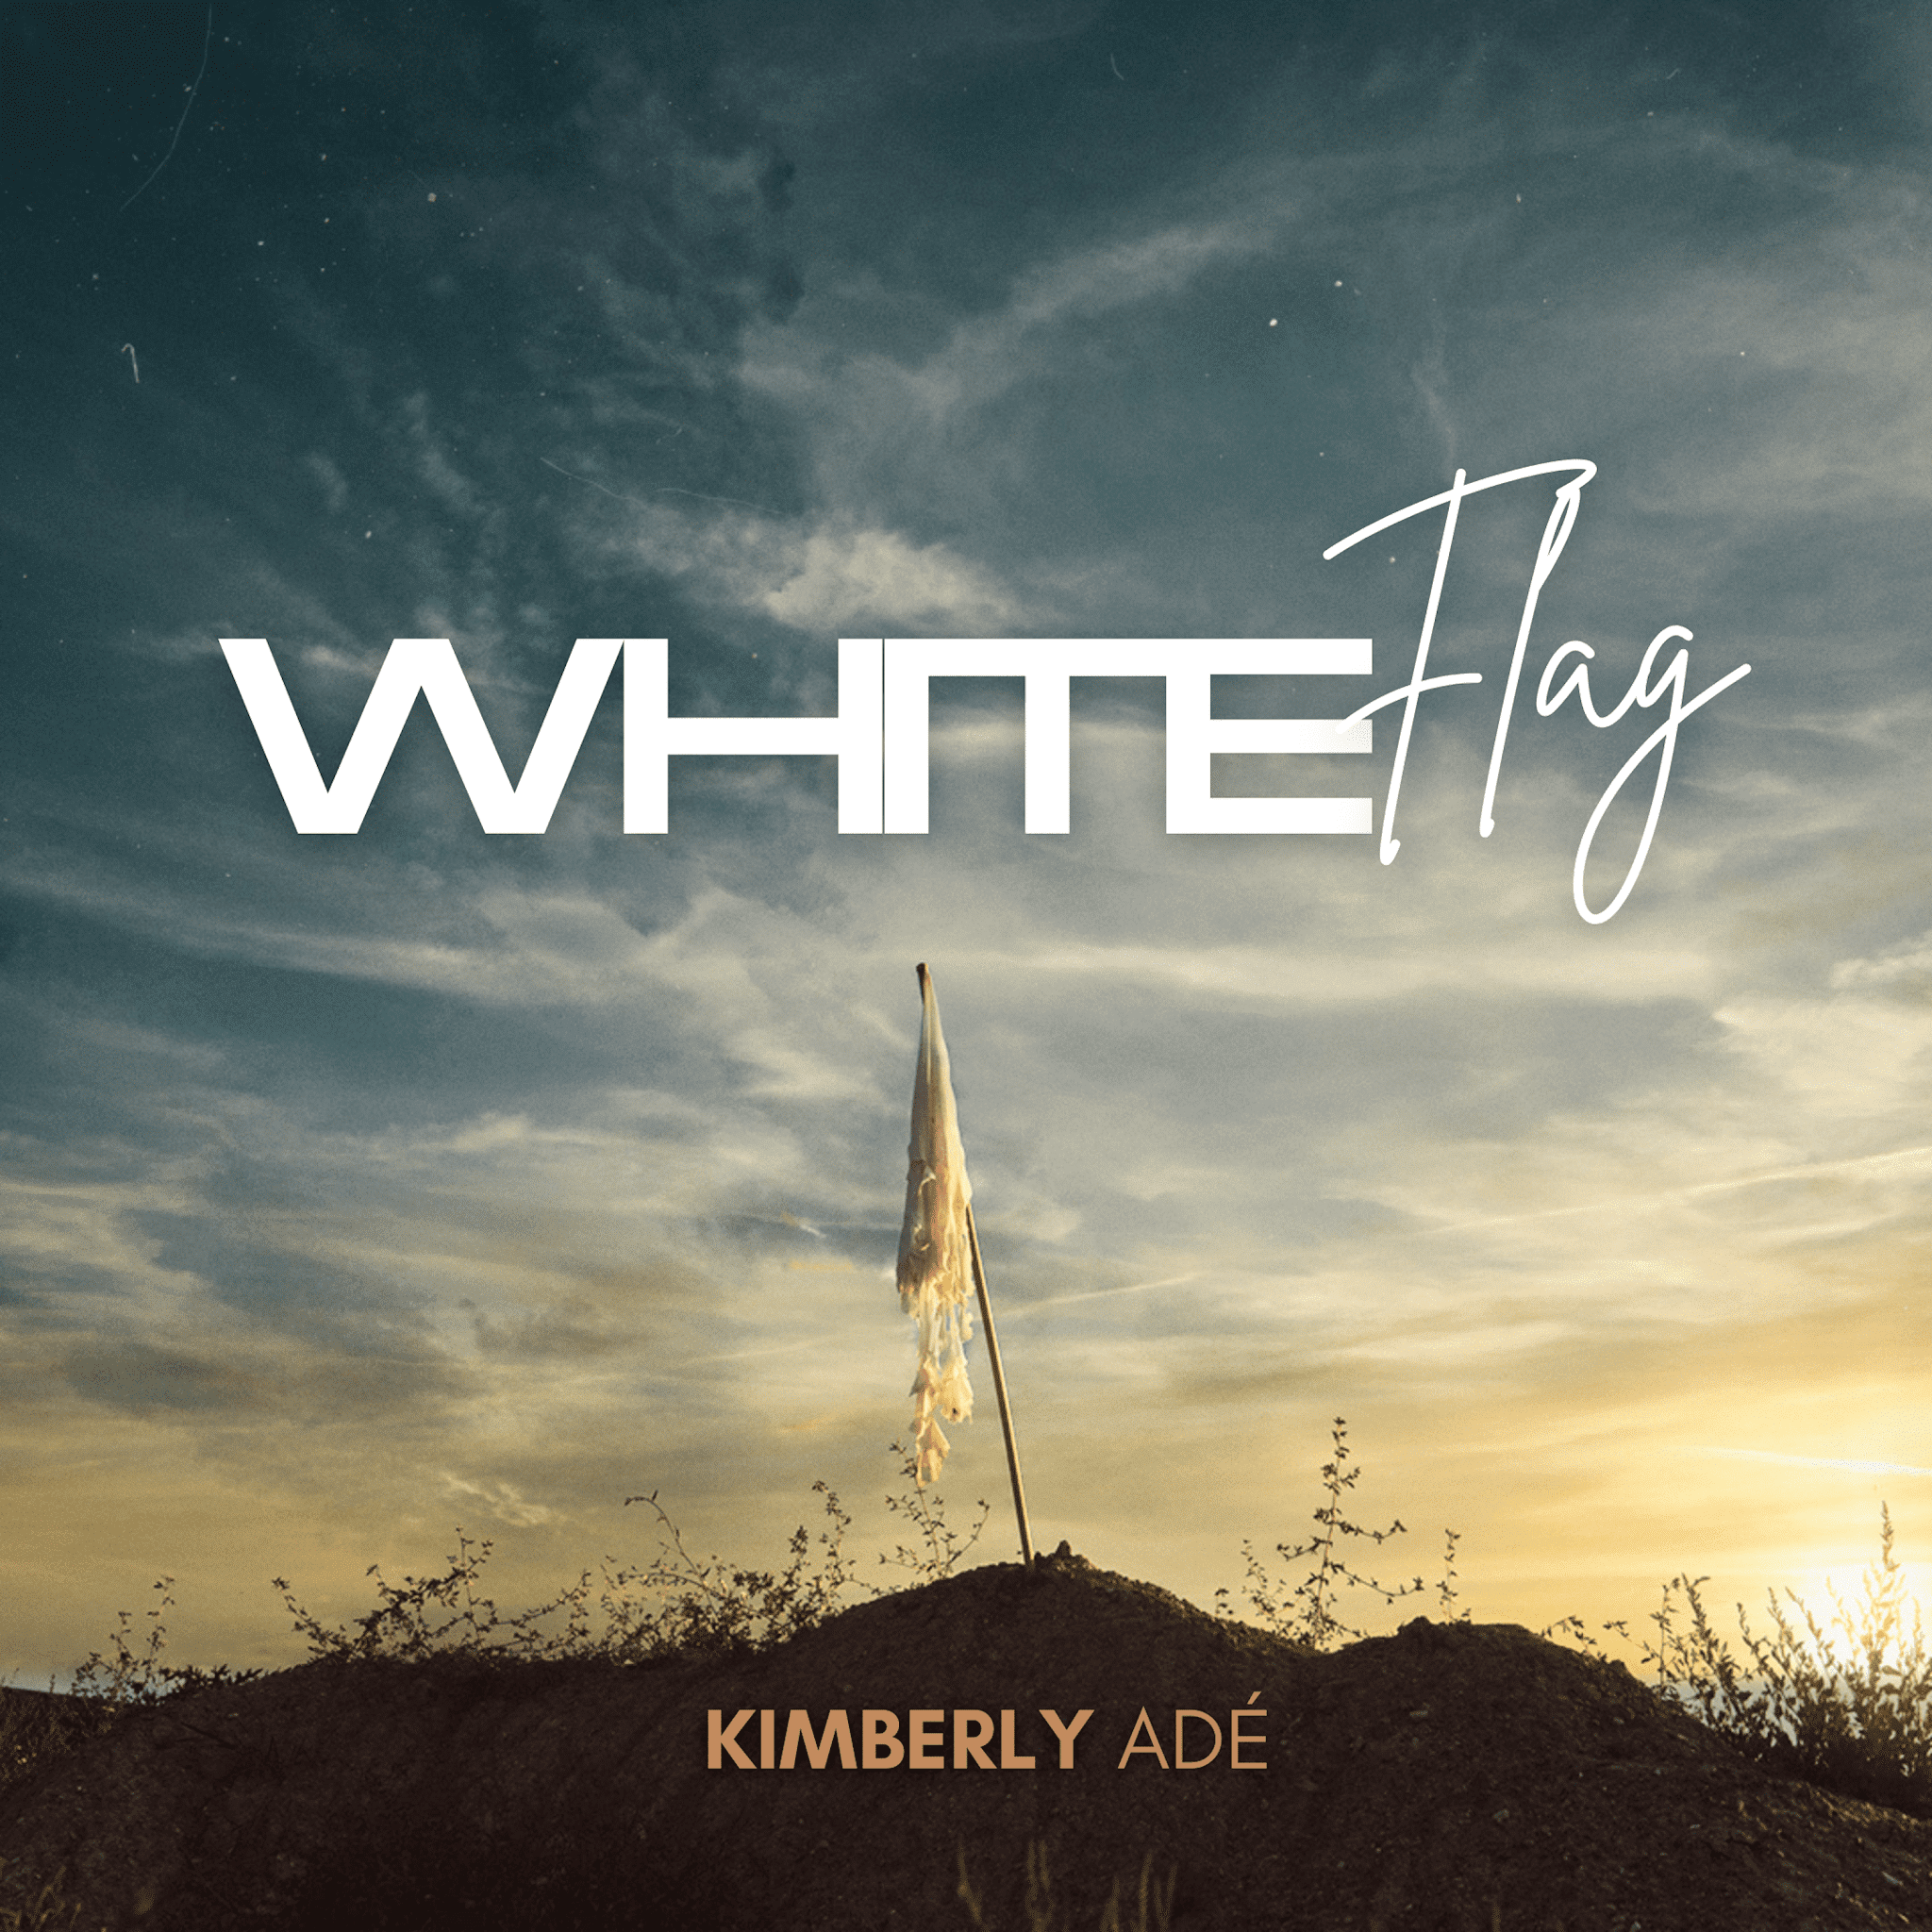 Kimberly Adé Releases New Single "White Flag"